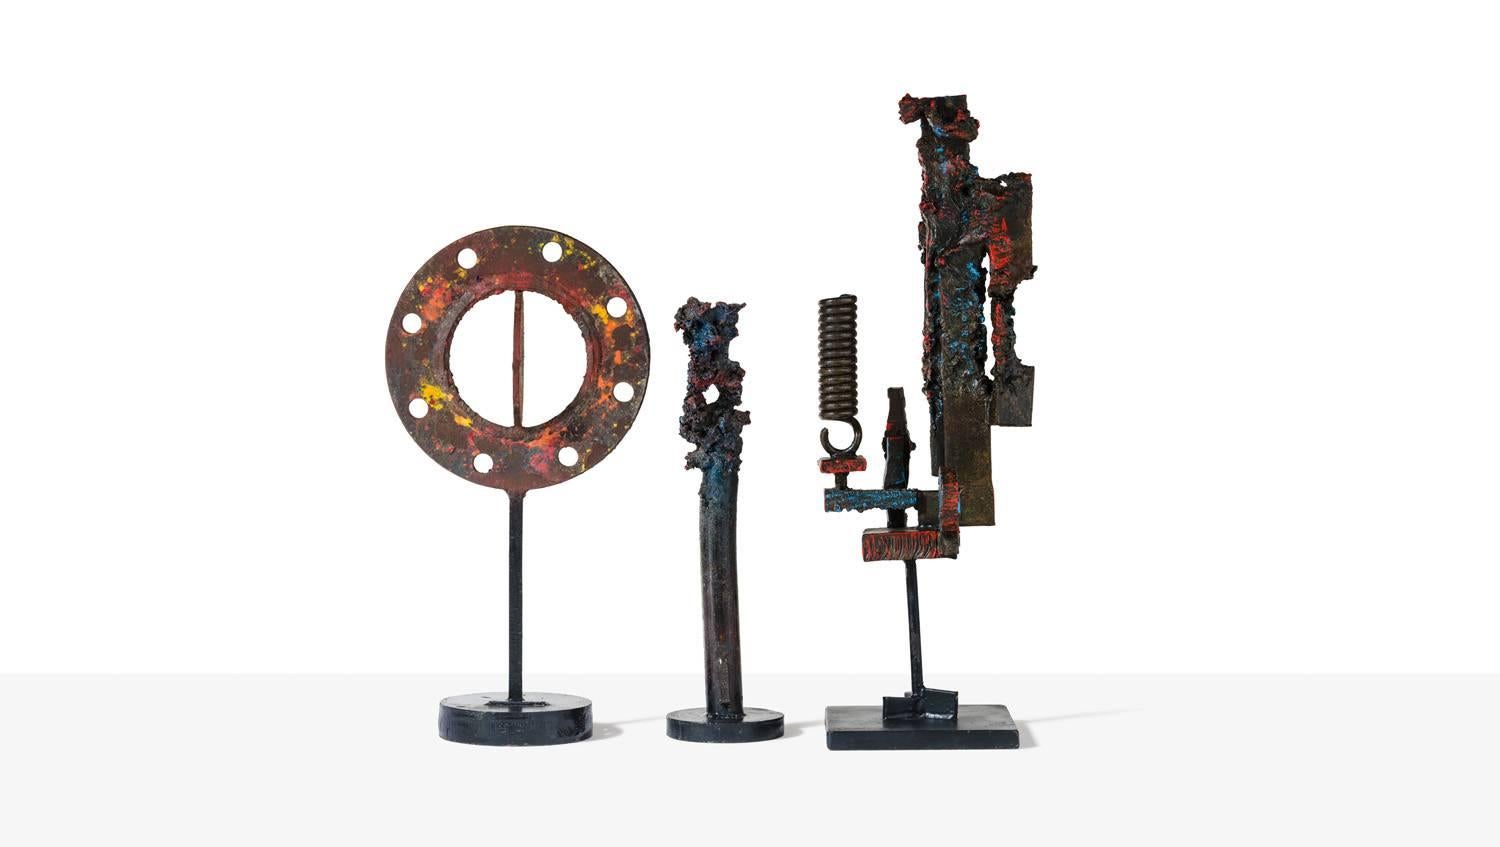 'Arcobaleno' sculpture by Salvino Marsura.
Steel with powder colored pigments baked onto the surface. 

Arcobaleno is shown in the photos with two other sculptures.
Price shown is for Arcobaleno only, but all three pieces can be bought as a set